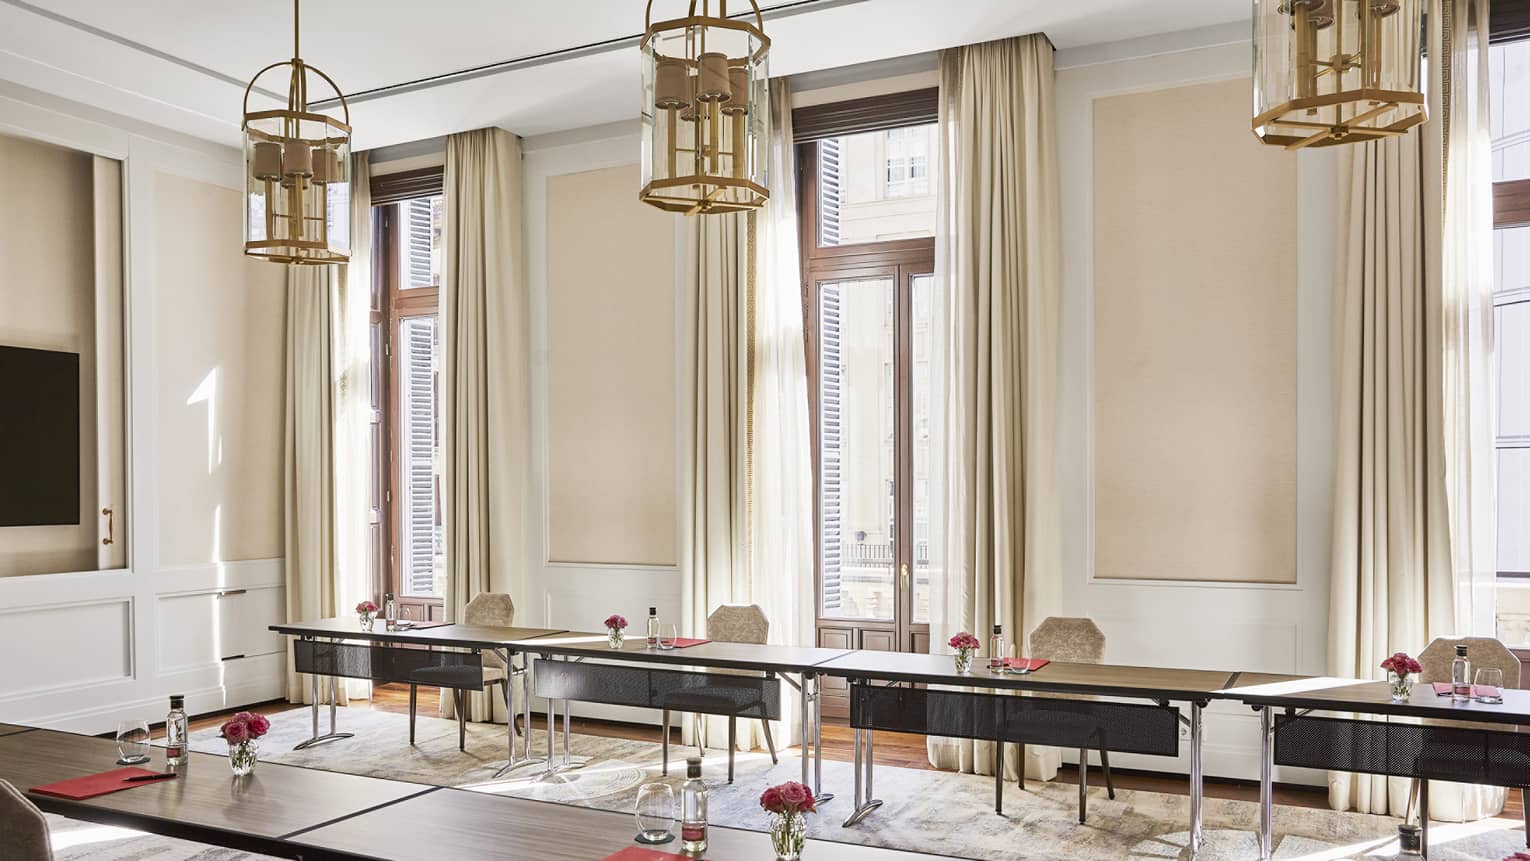 Meeting room with u-shape table set-up, three small chandeliers hanging from ceiling, three windows